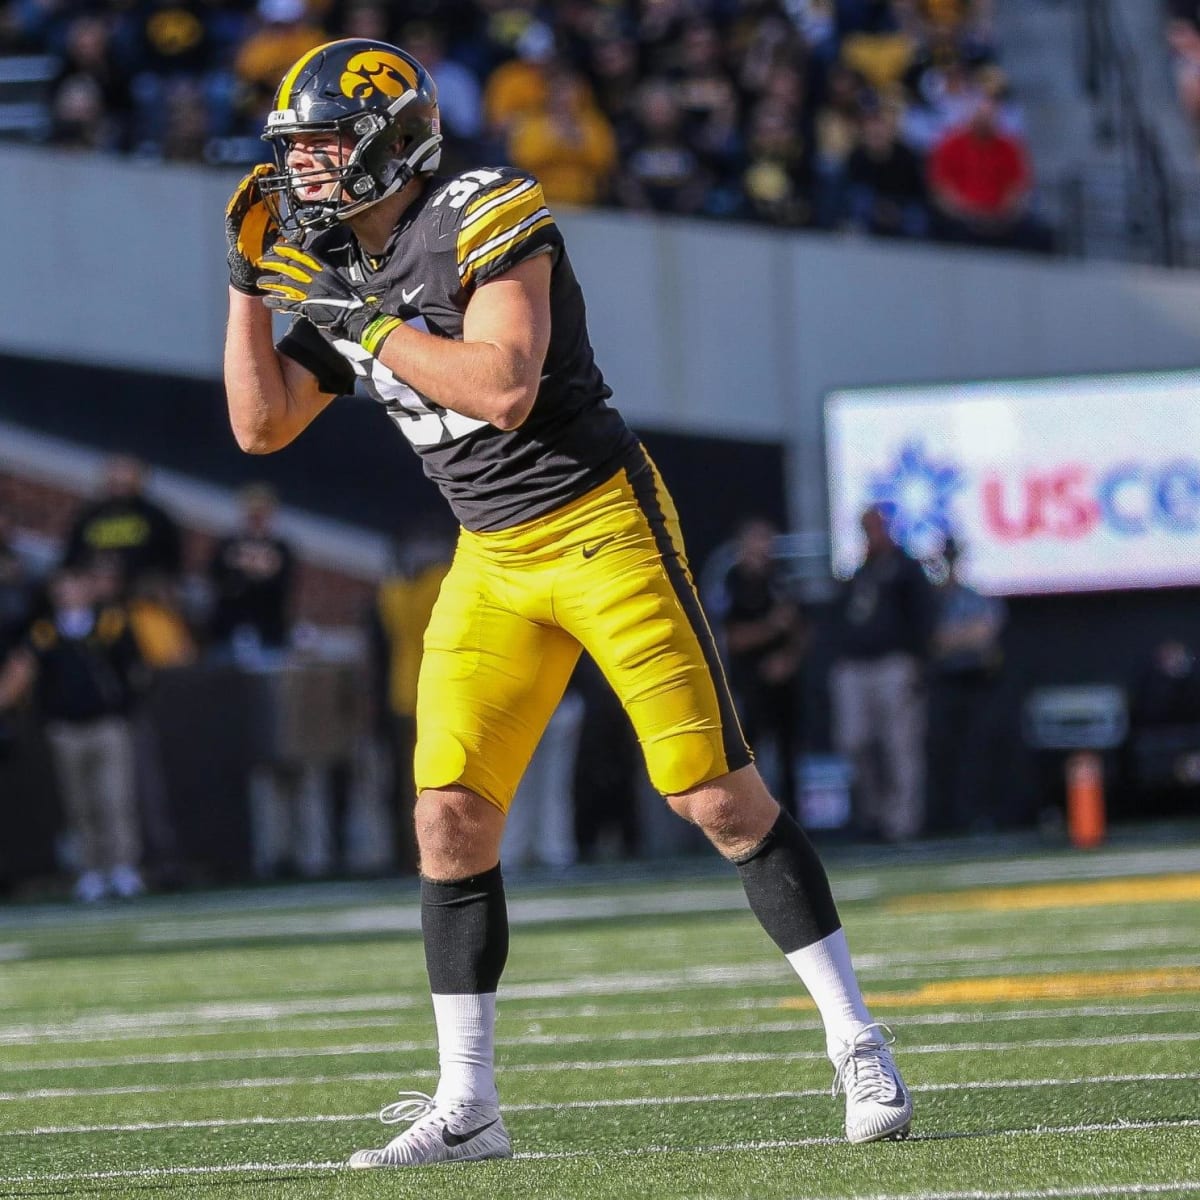 How Jack Campbell Sets the Tone for Iowa's Defense